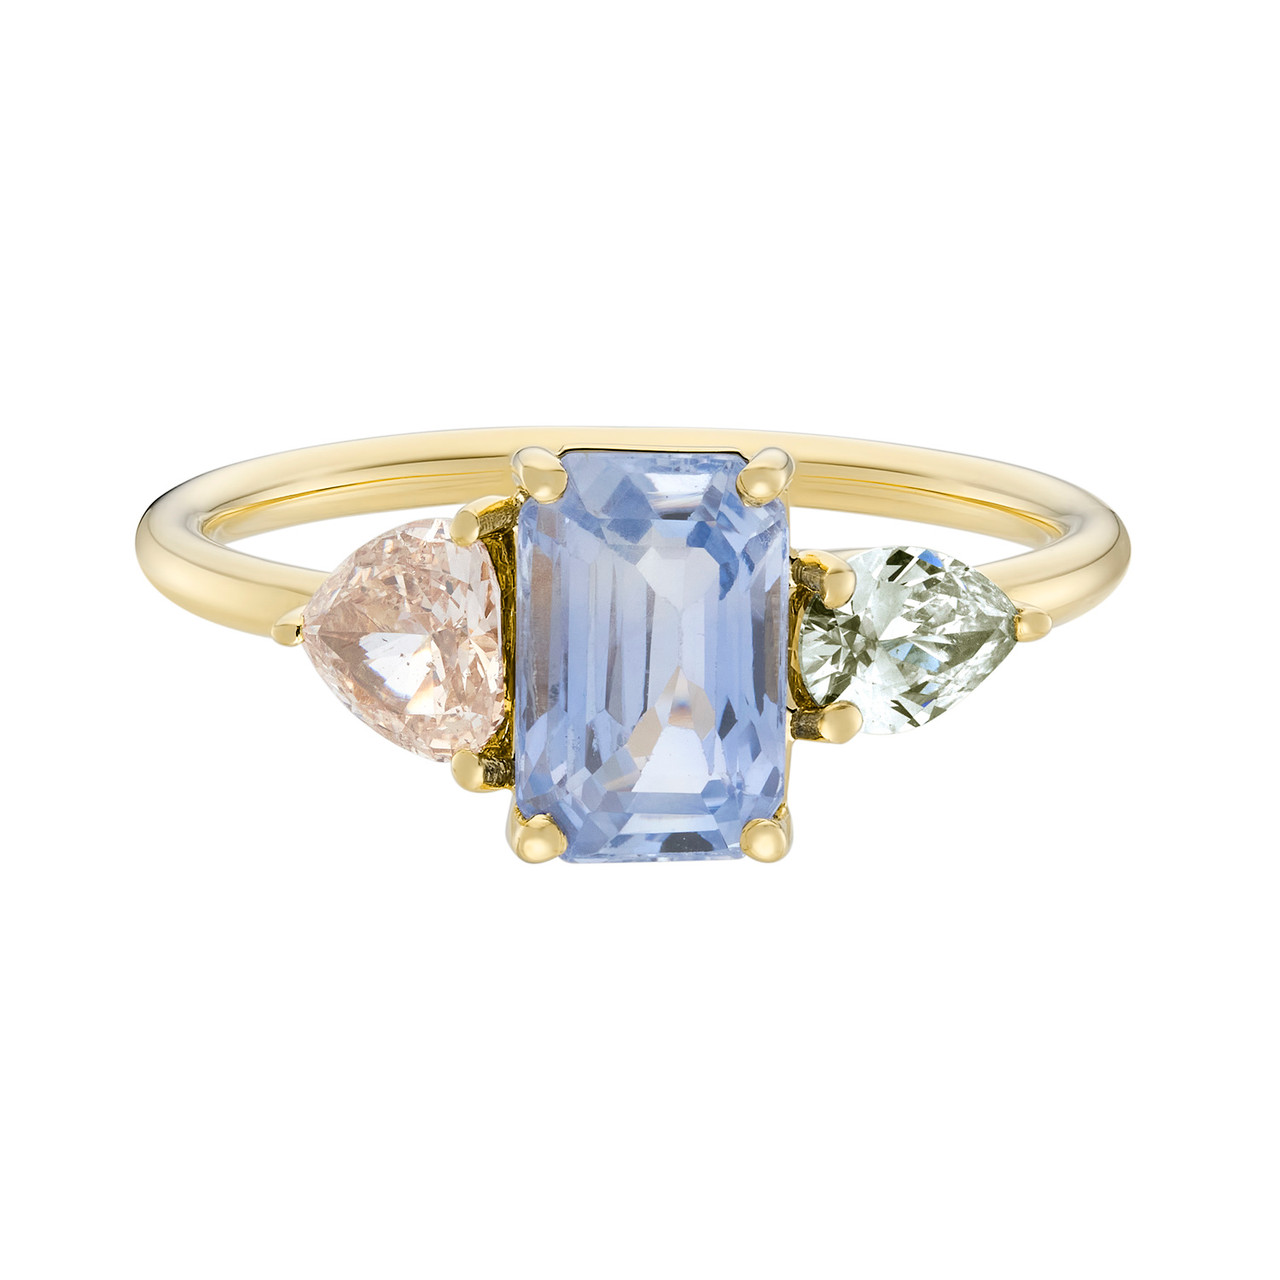 Colored Gemstone Engagement Rings For Sale Online |GemsNY